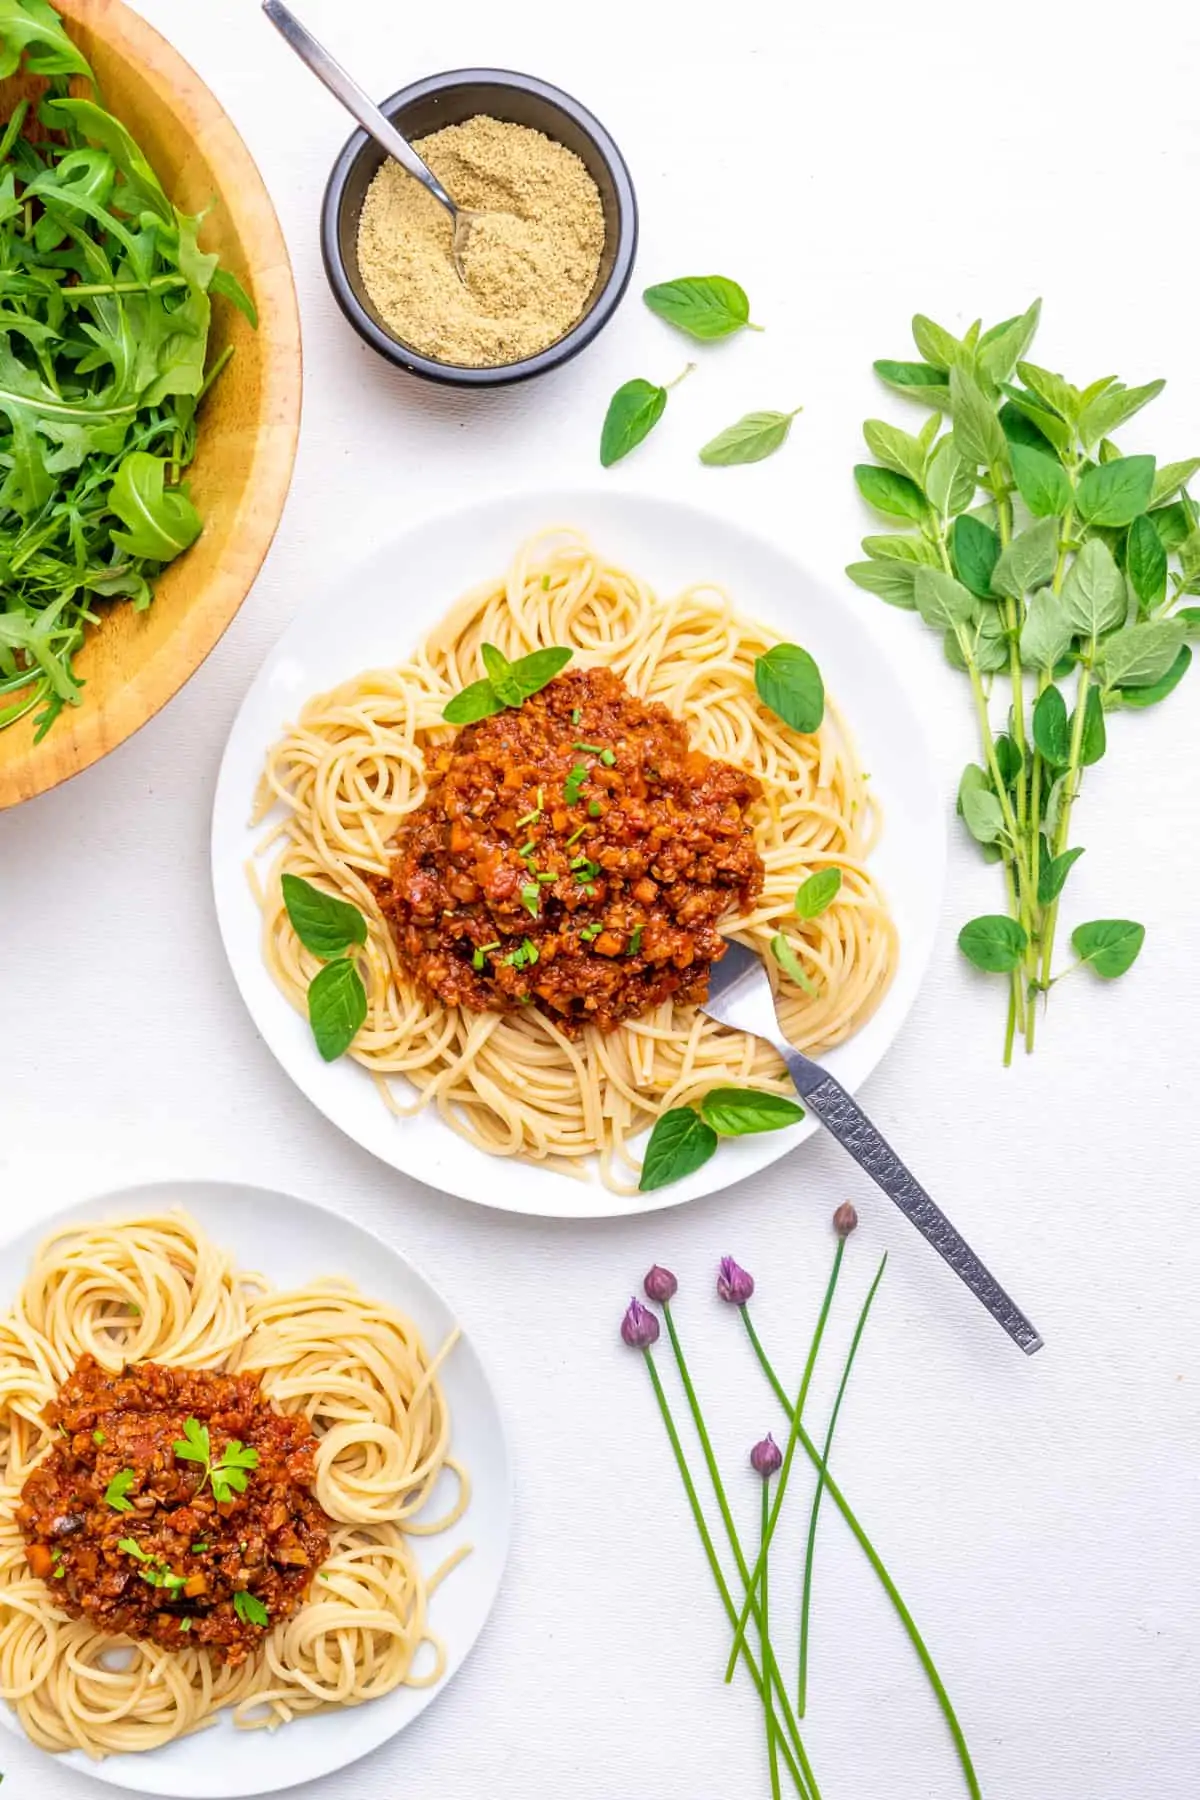 Top down view of a dining table. Two plates of spaghetti bolognese, a bunch of fresh herbs and chives, a small pot of vegan parmesan and a bowl of rocket.